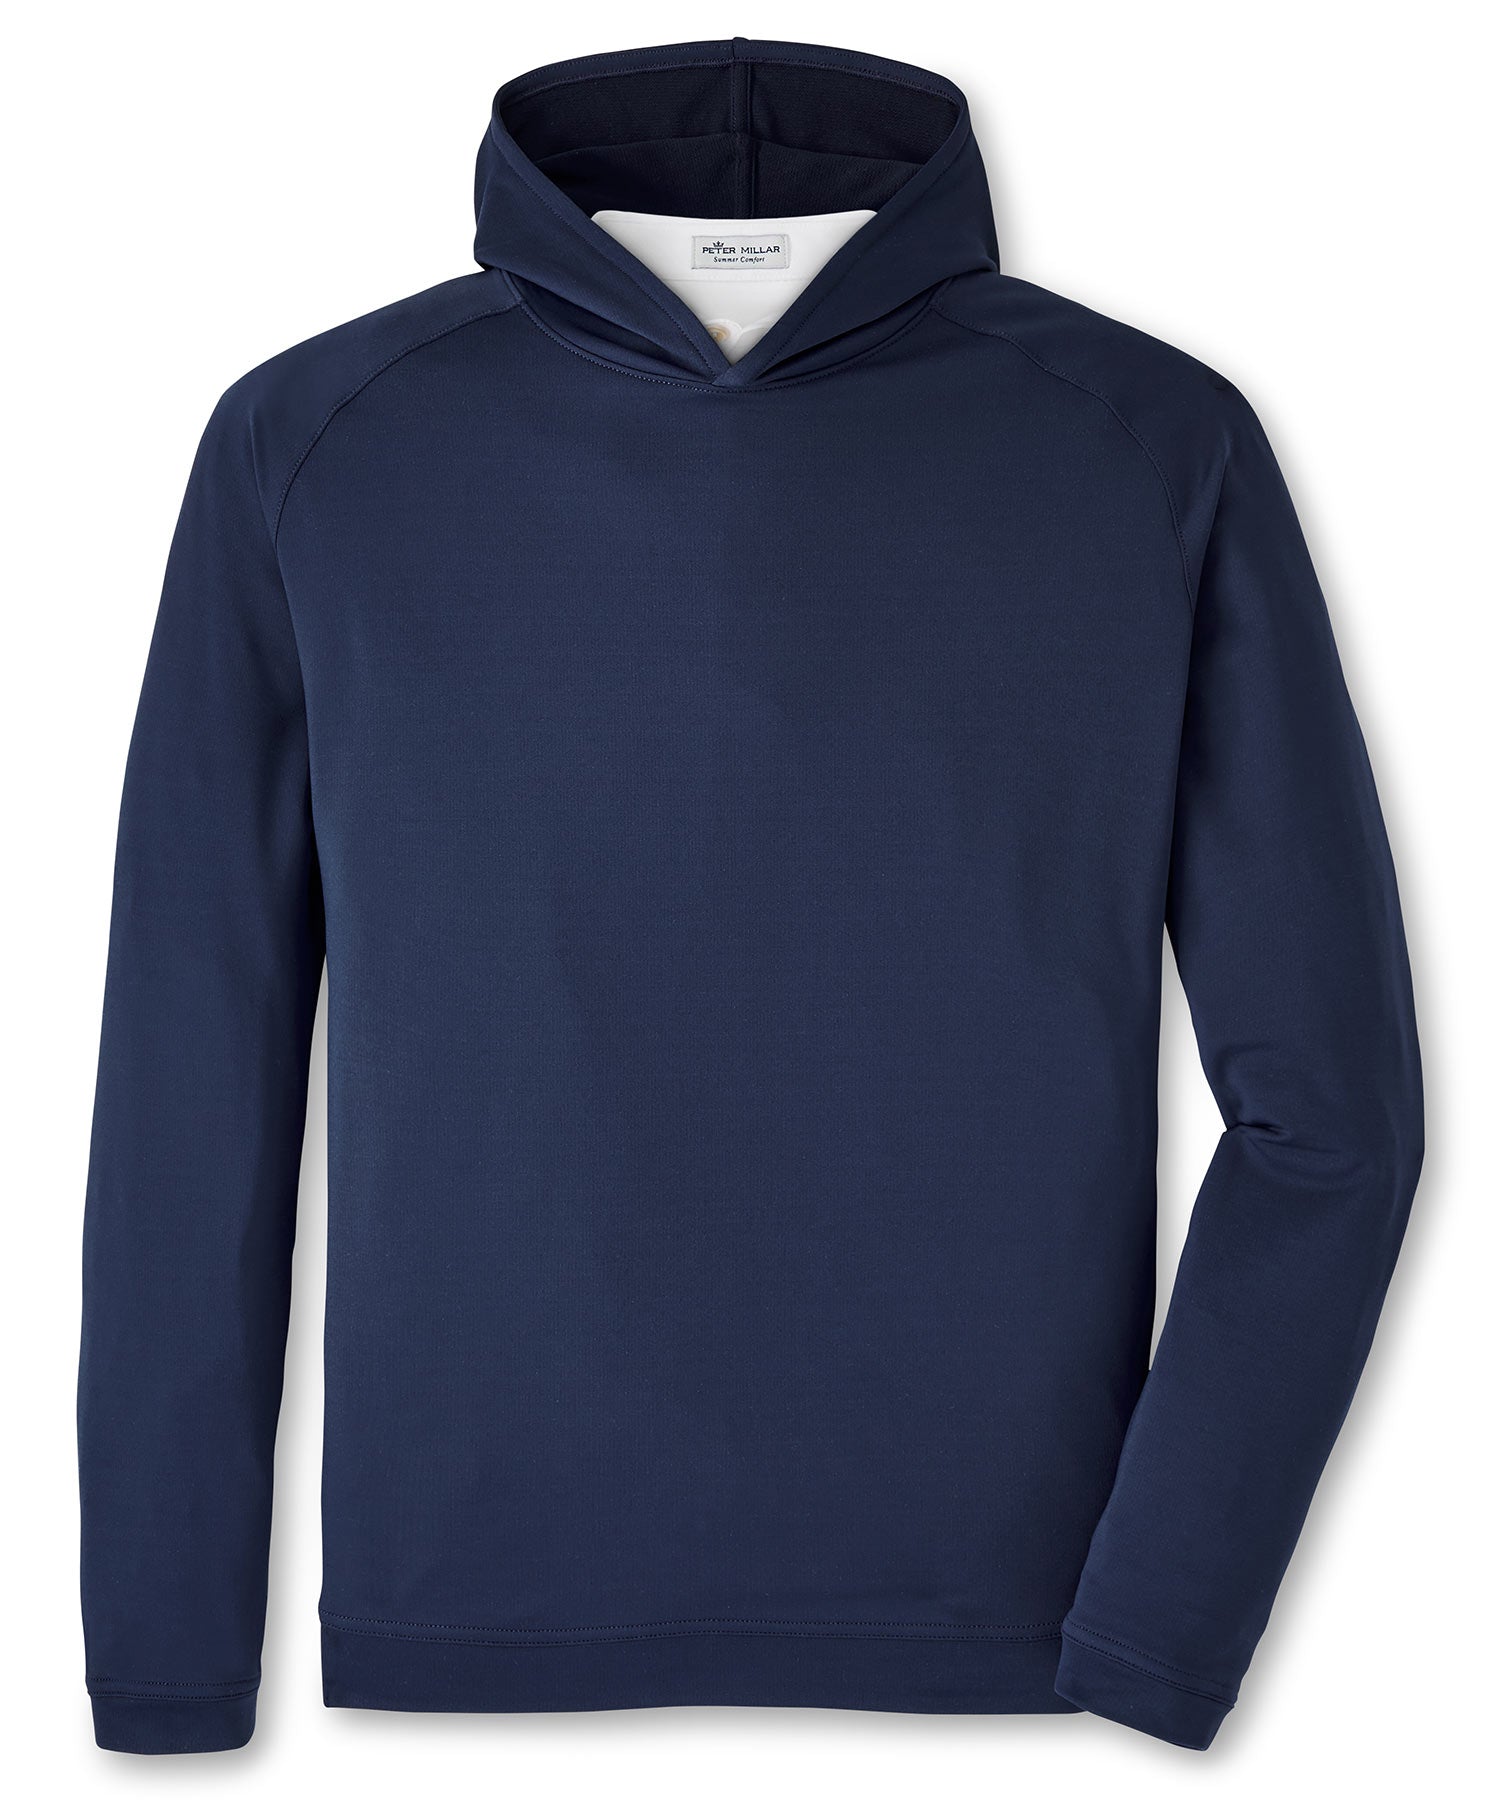 Athletic Shop: Big and Tall Sportswear for Men by Westport Big & Tall